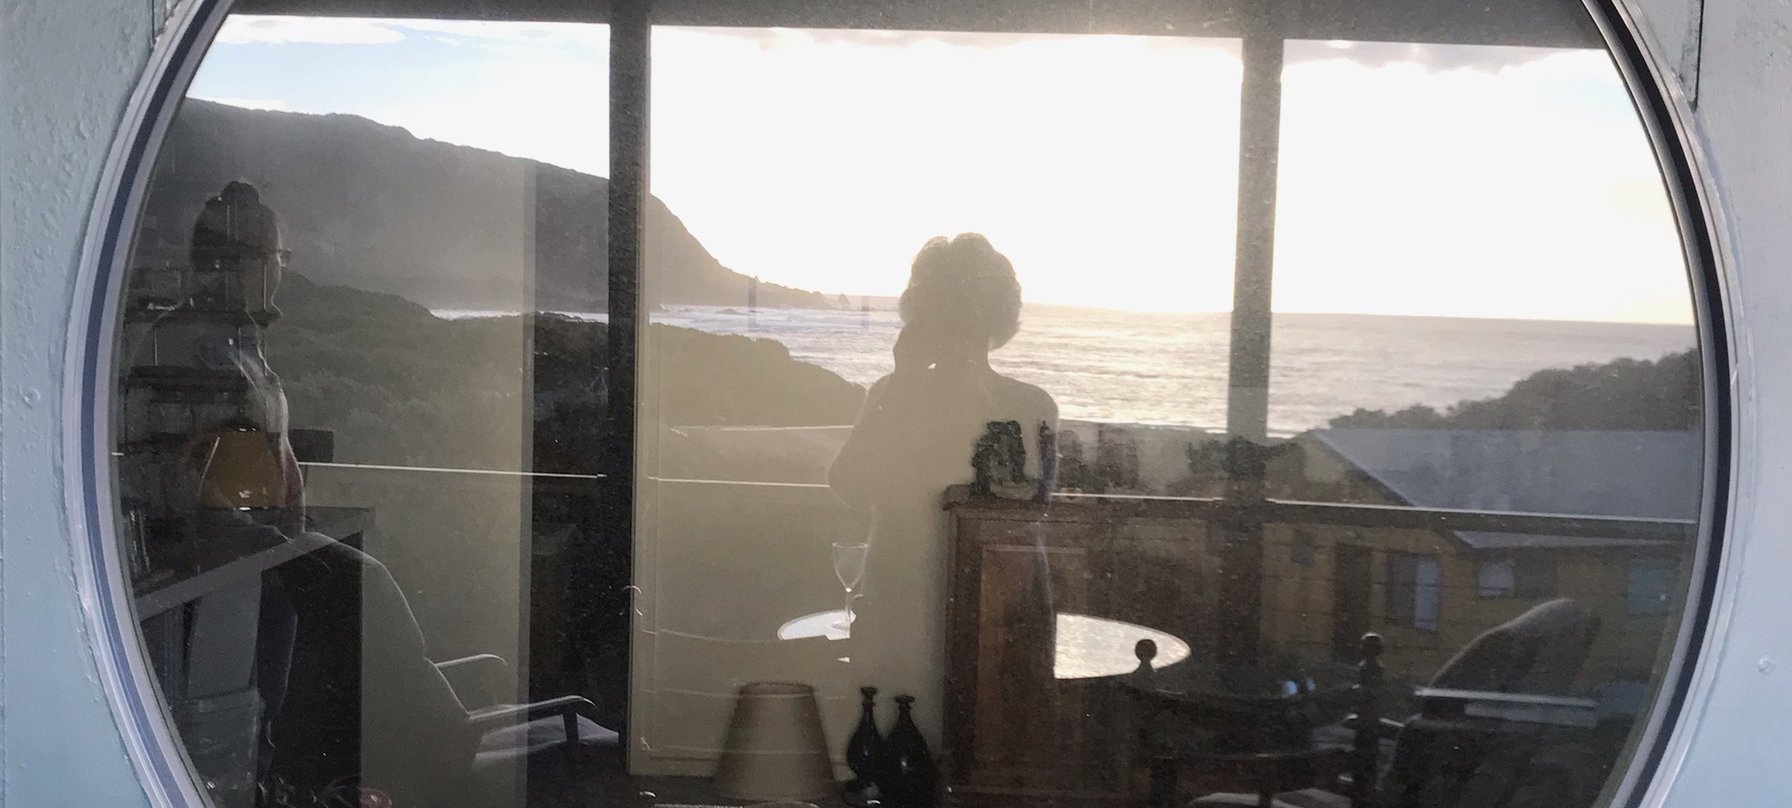 A photo taken in the reflection of a large round window. The reflection captures a sea-side scape of flat water, coastal hills and a sunlit sky. Credit Irene Briant.